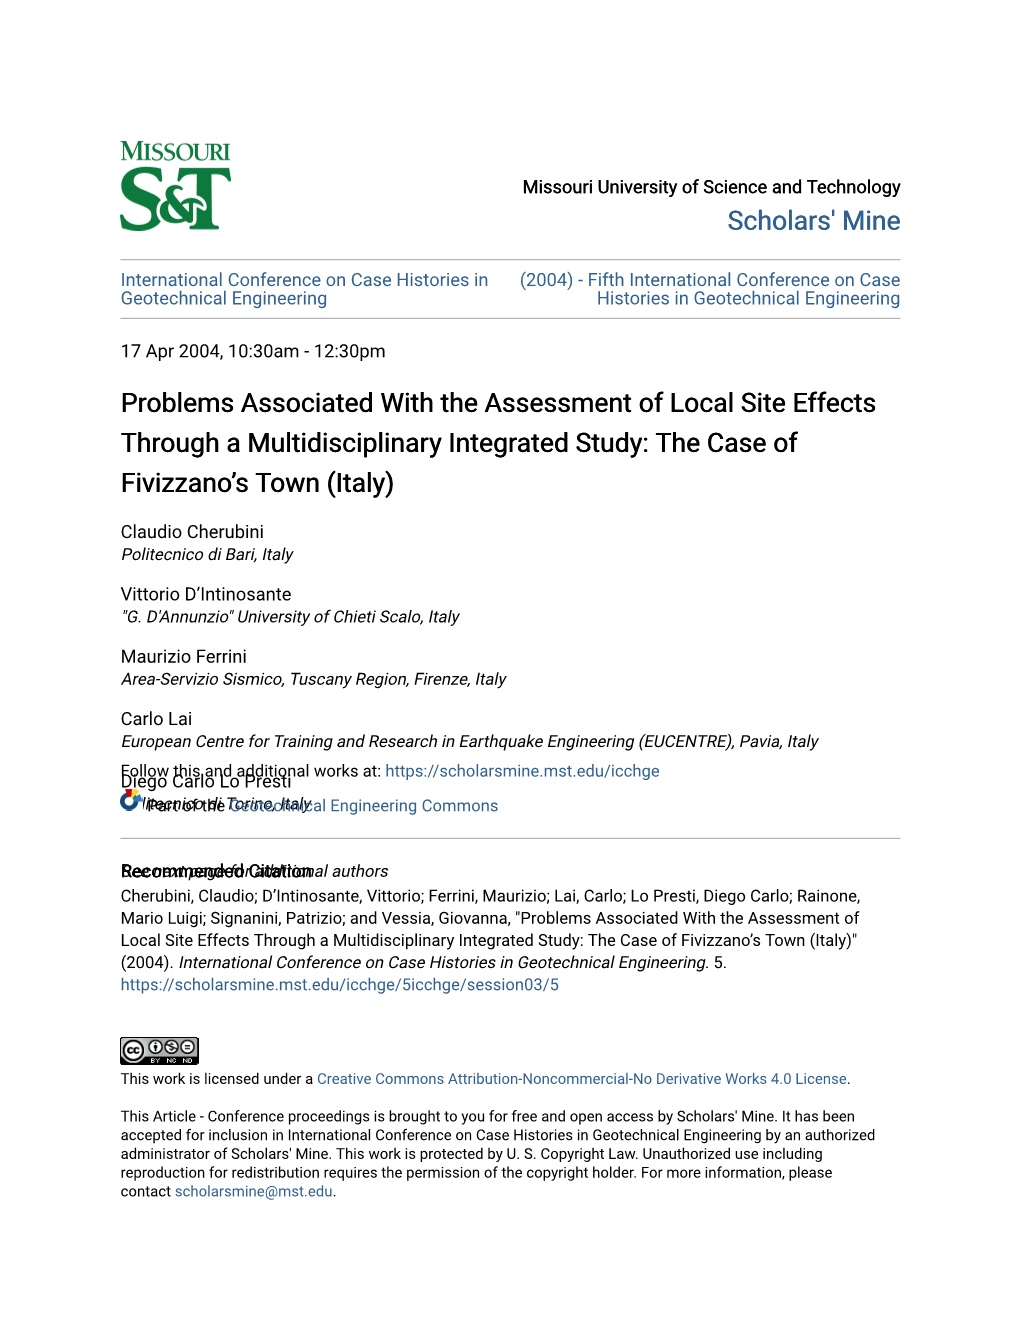 Problems Associated with the Assessment of Local Site Effects Through a Multidisciplinary Integrated Study: the Case of Fivizzano’S Town (Italy)